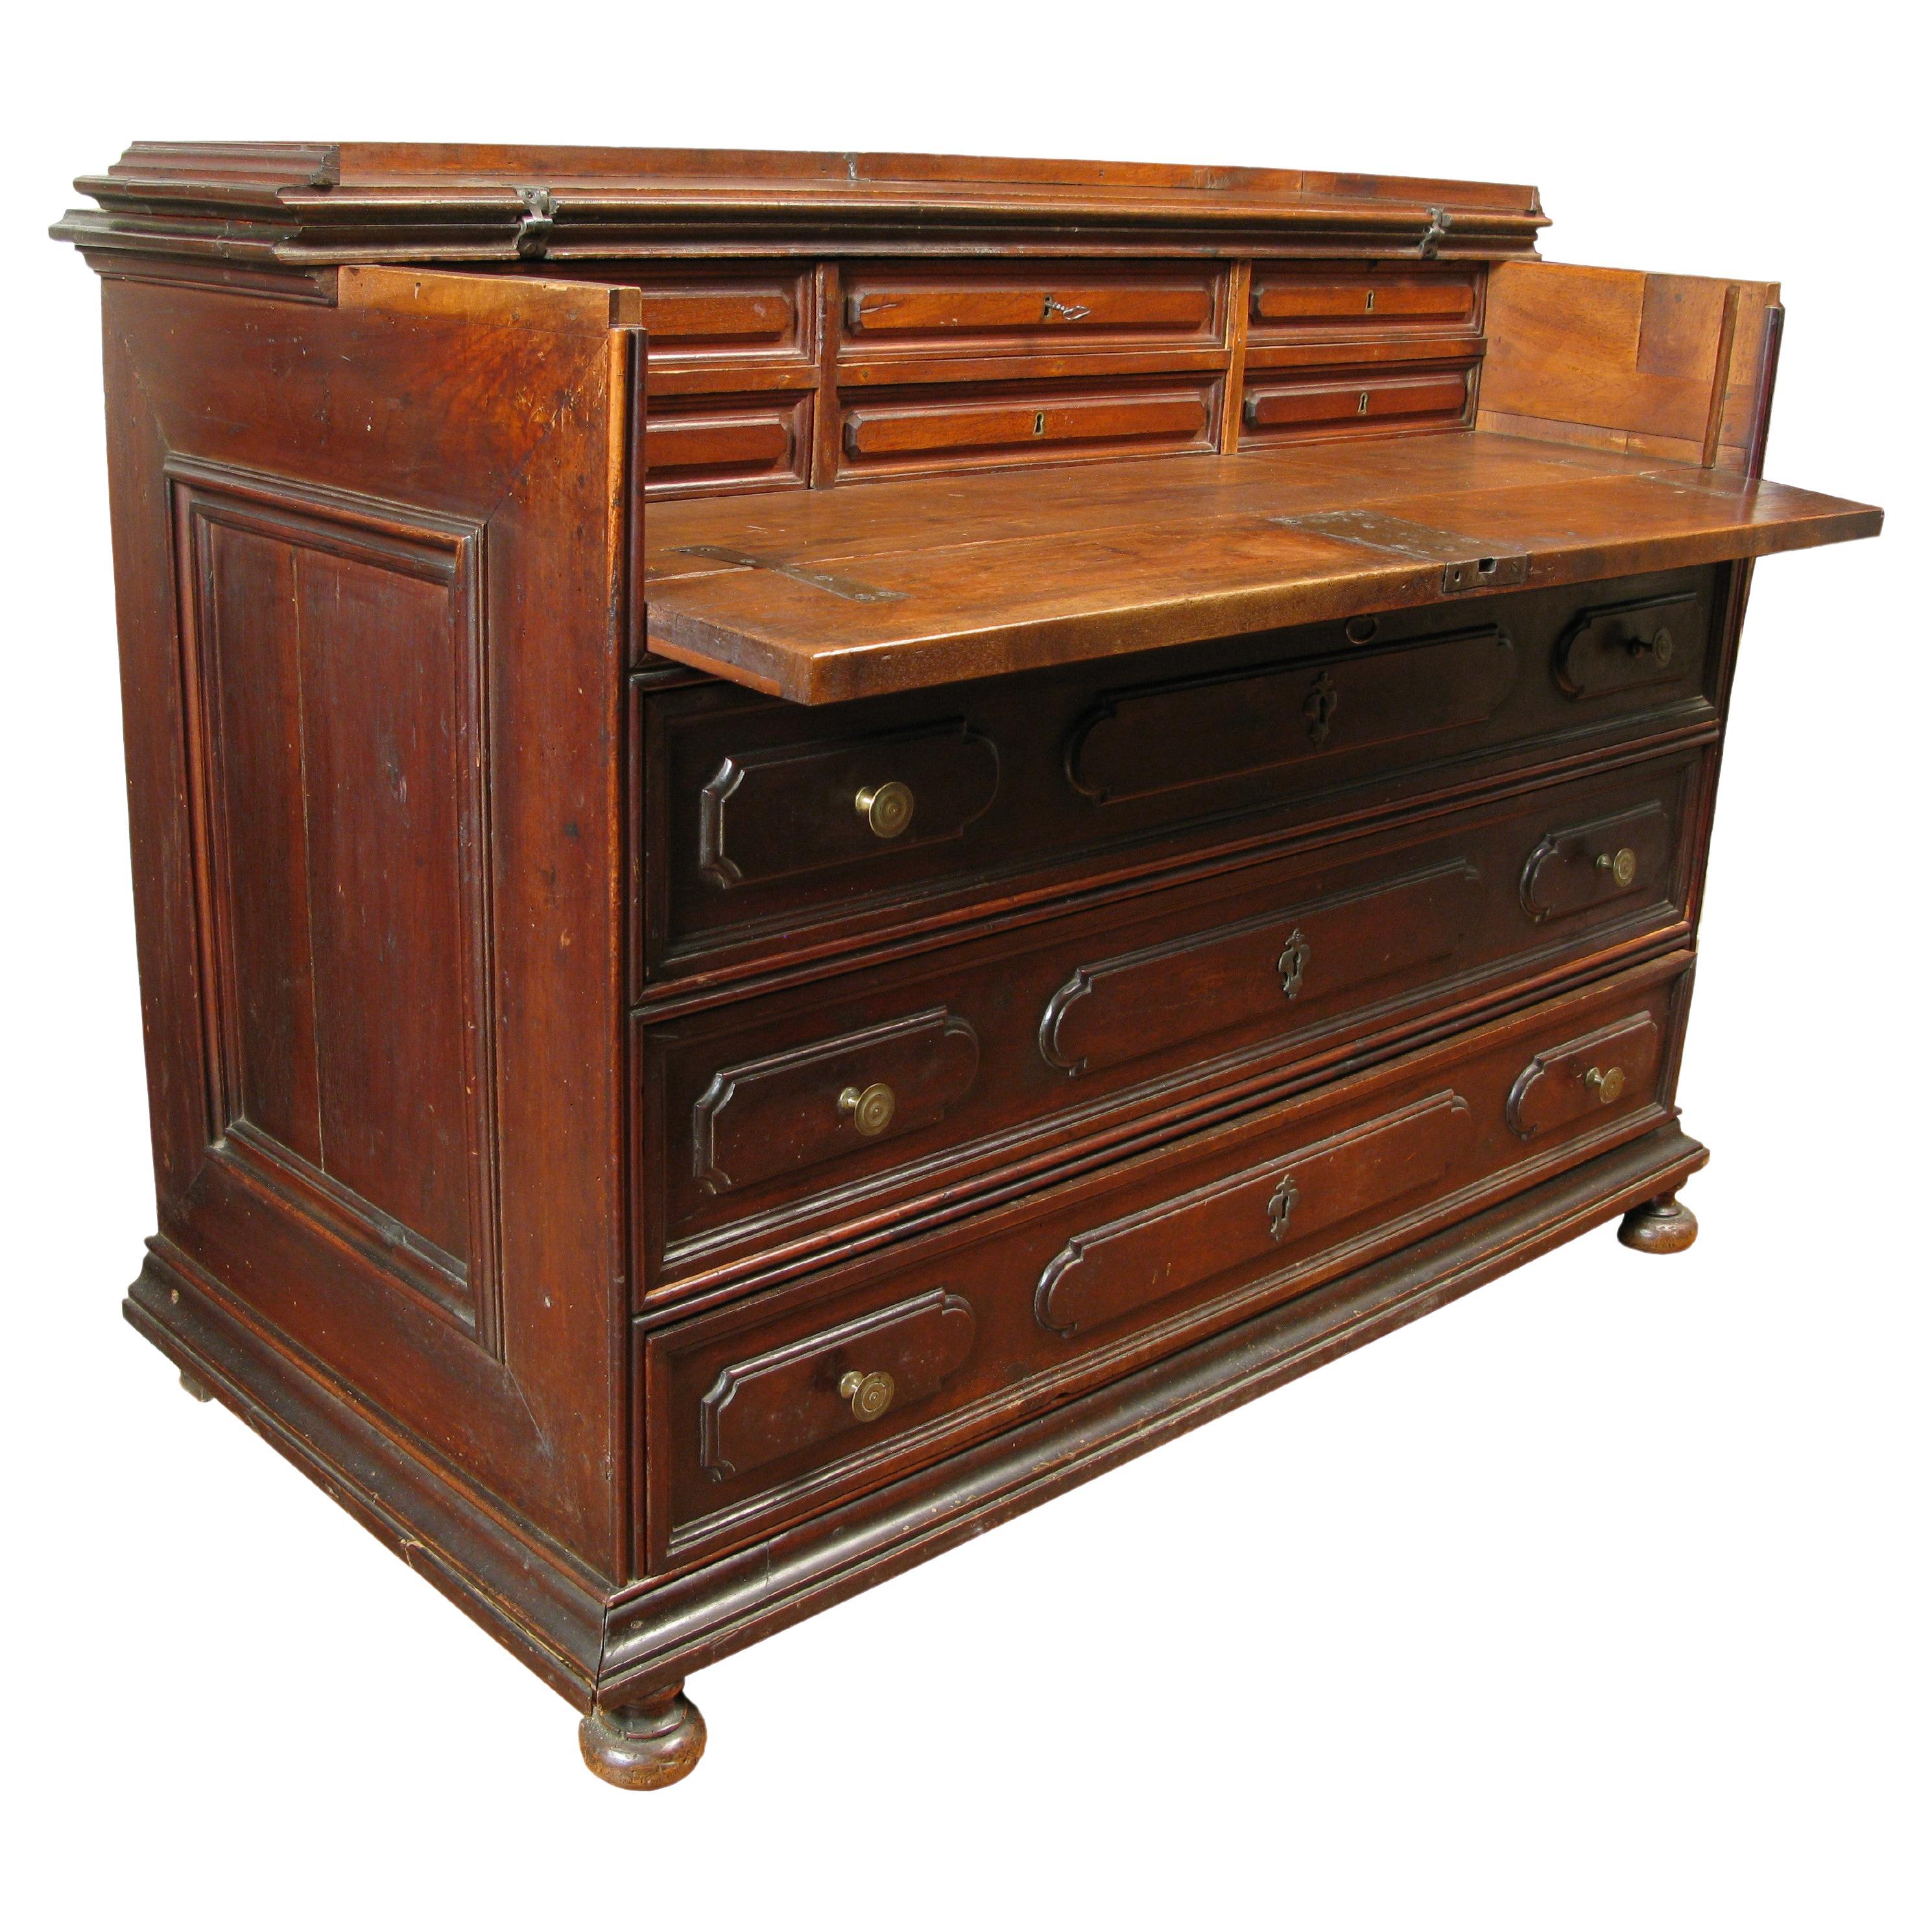 Late 17th-century-early 18th-century Lombard chest of drawers canterano For Sale